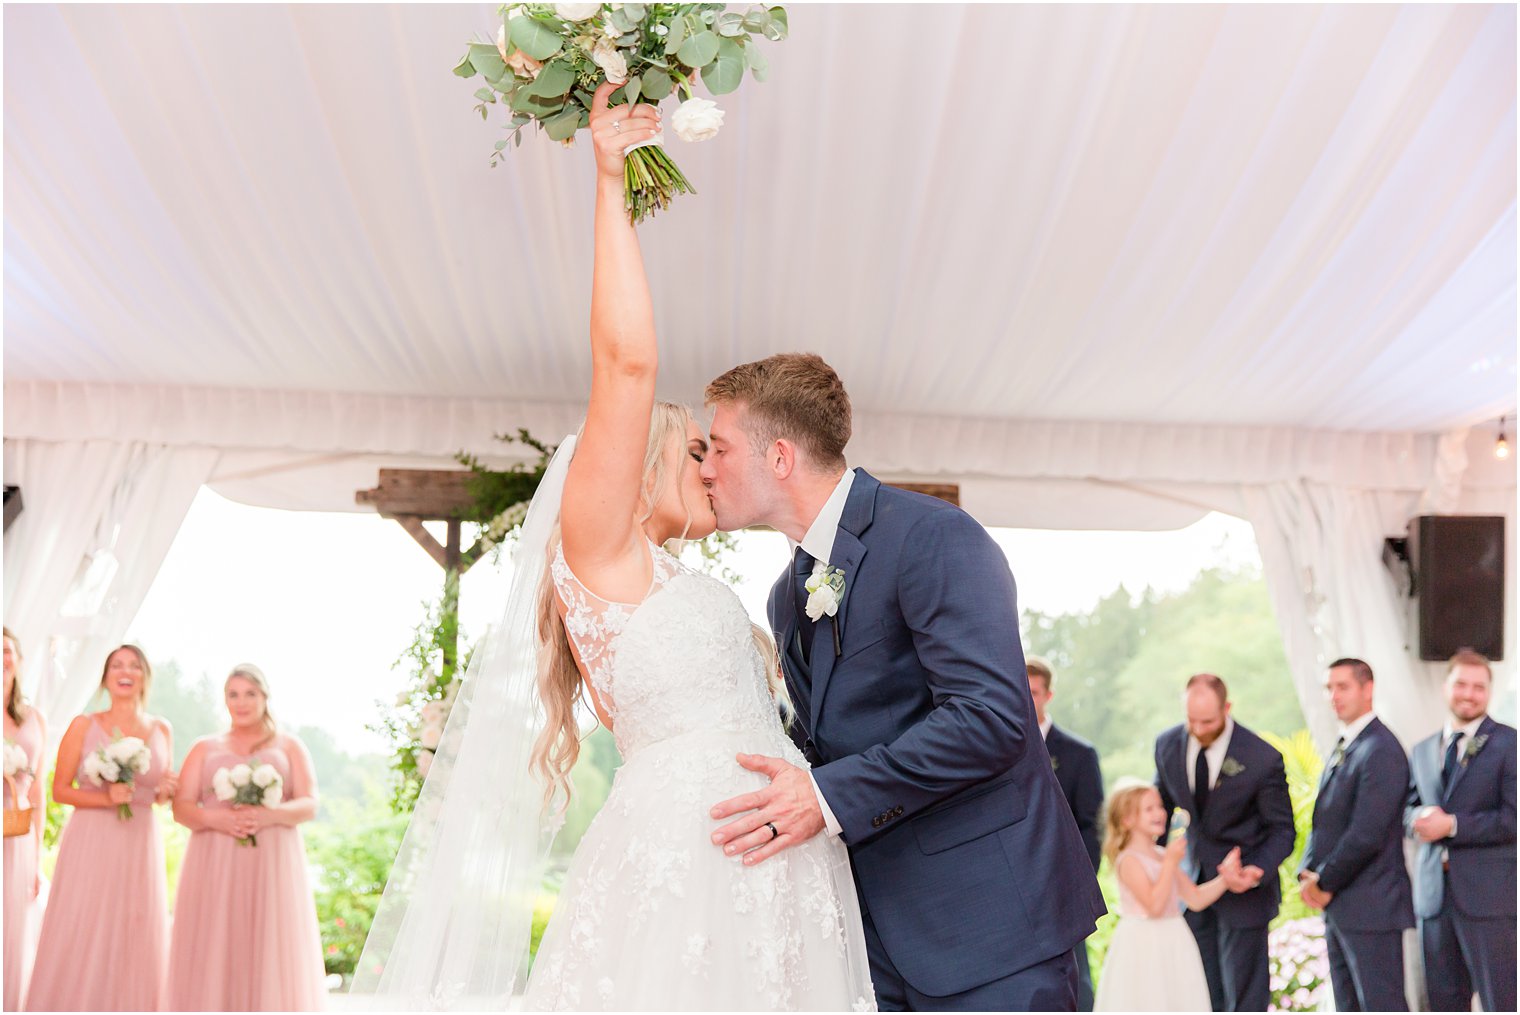 bride and groom kiss while bride pumps bouquet in the air